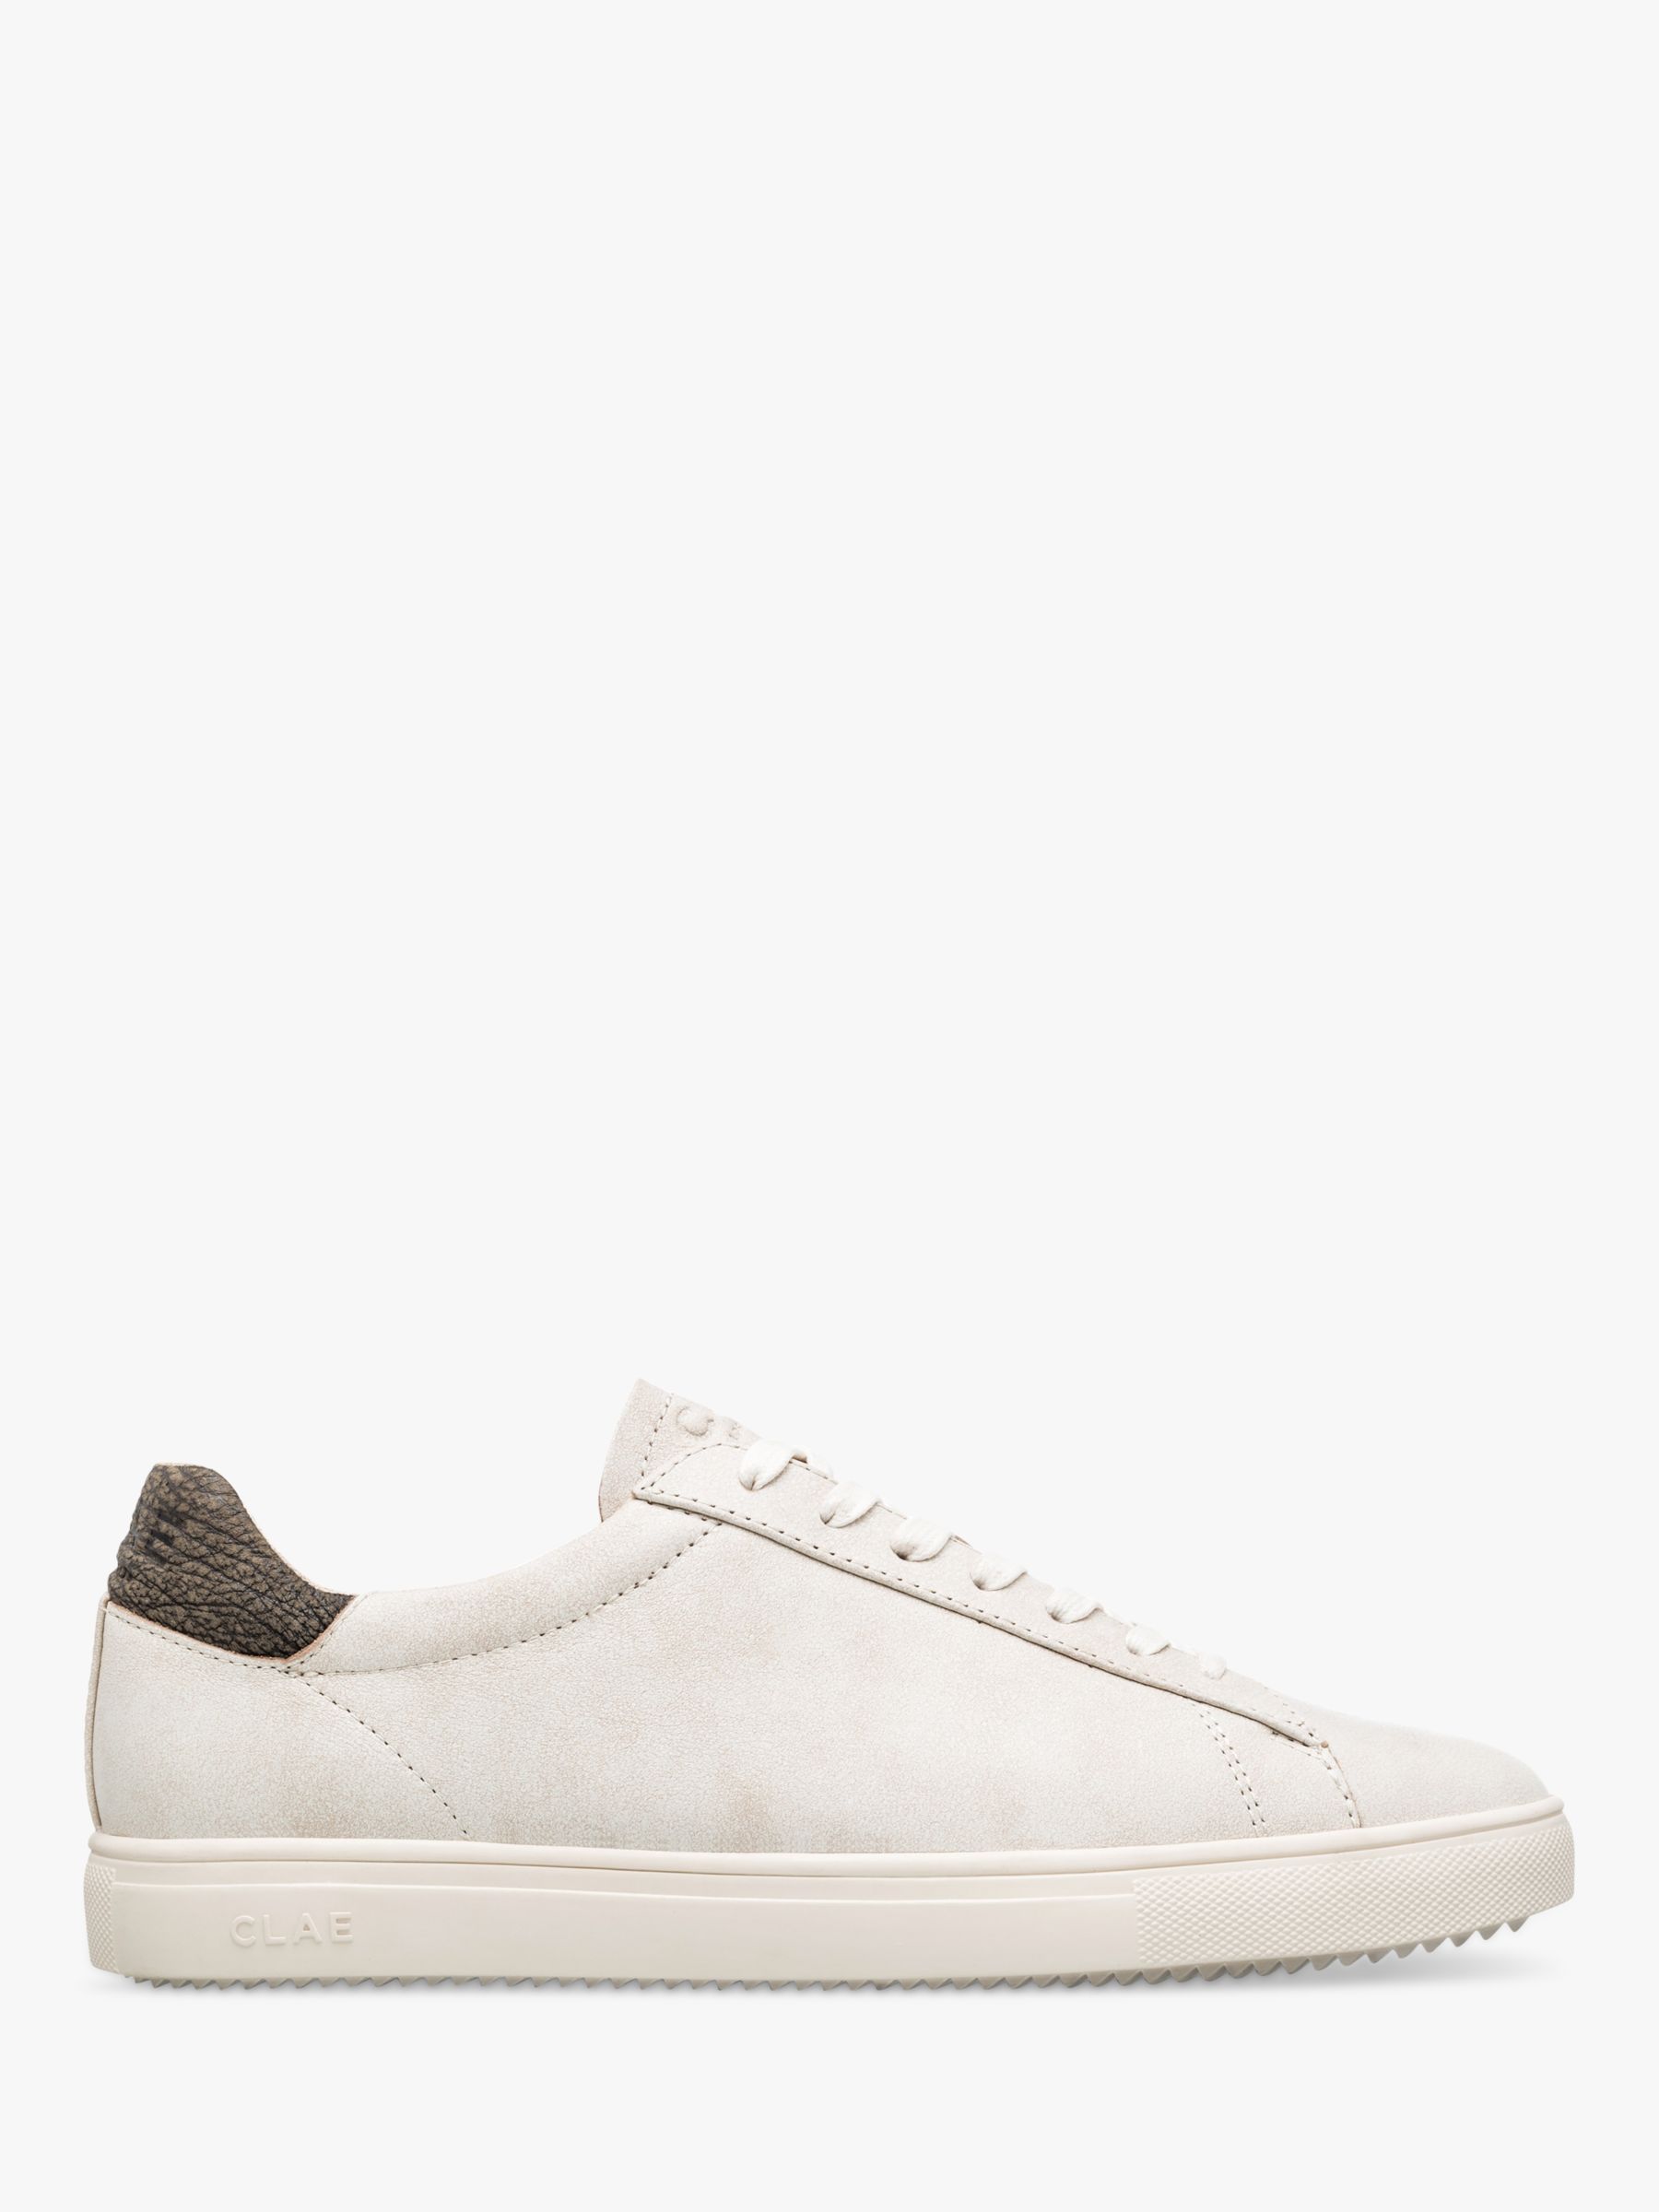 CLAE Bradley Leather Classic Court Trainers, Distressed Elephant